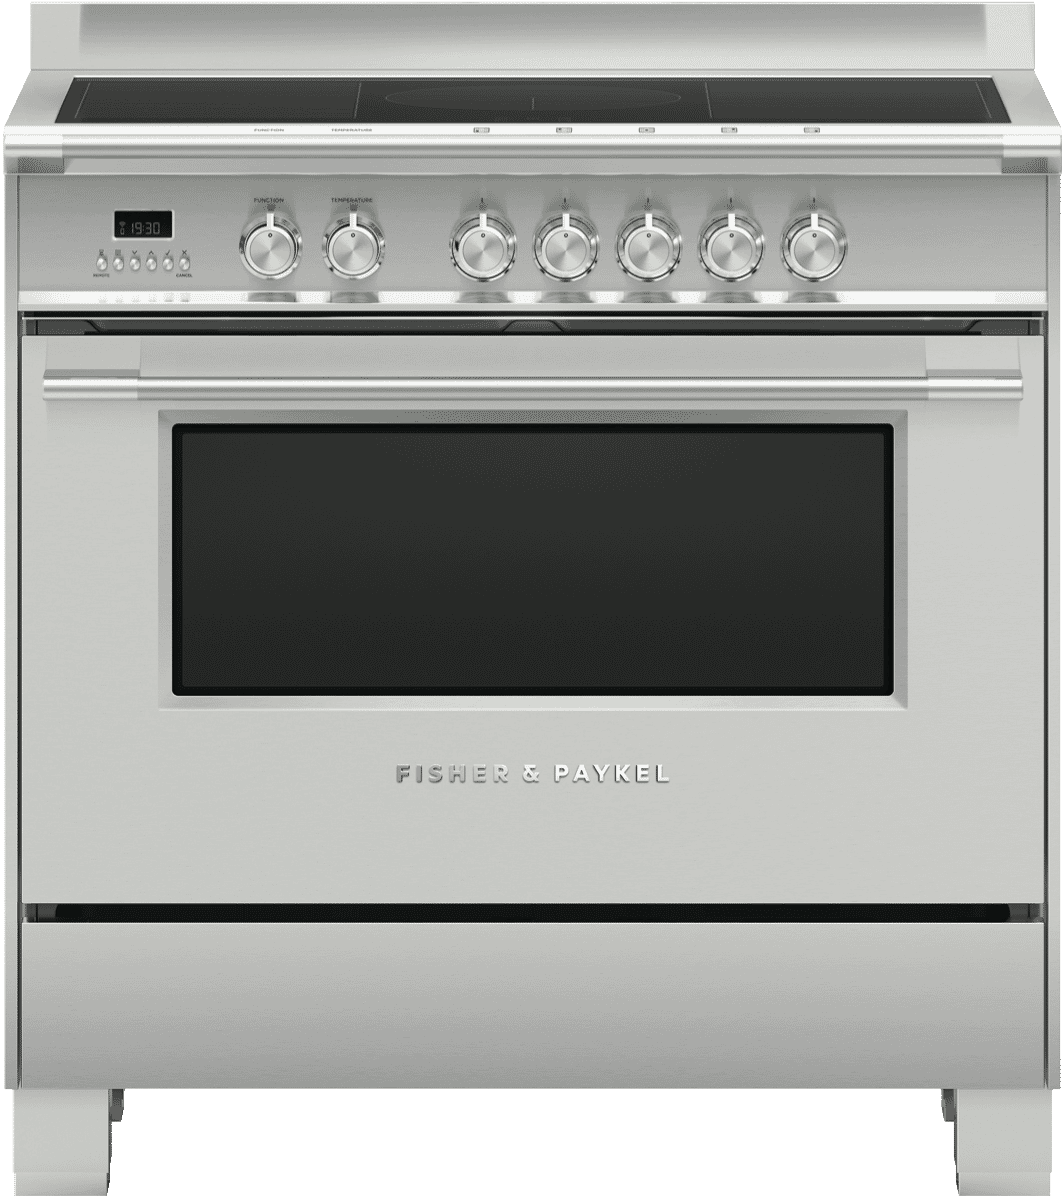 600mm upright electric cooker